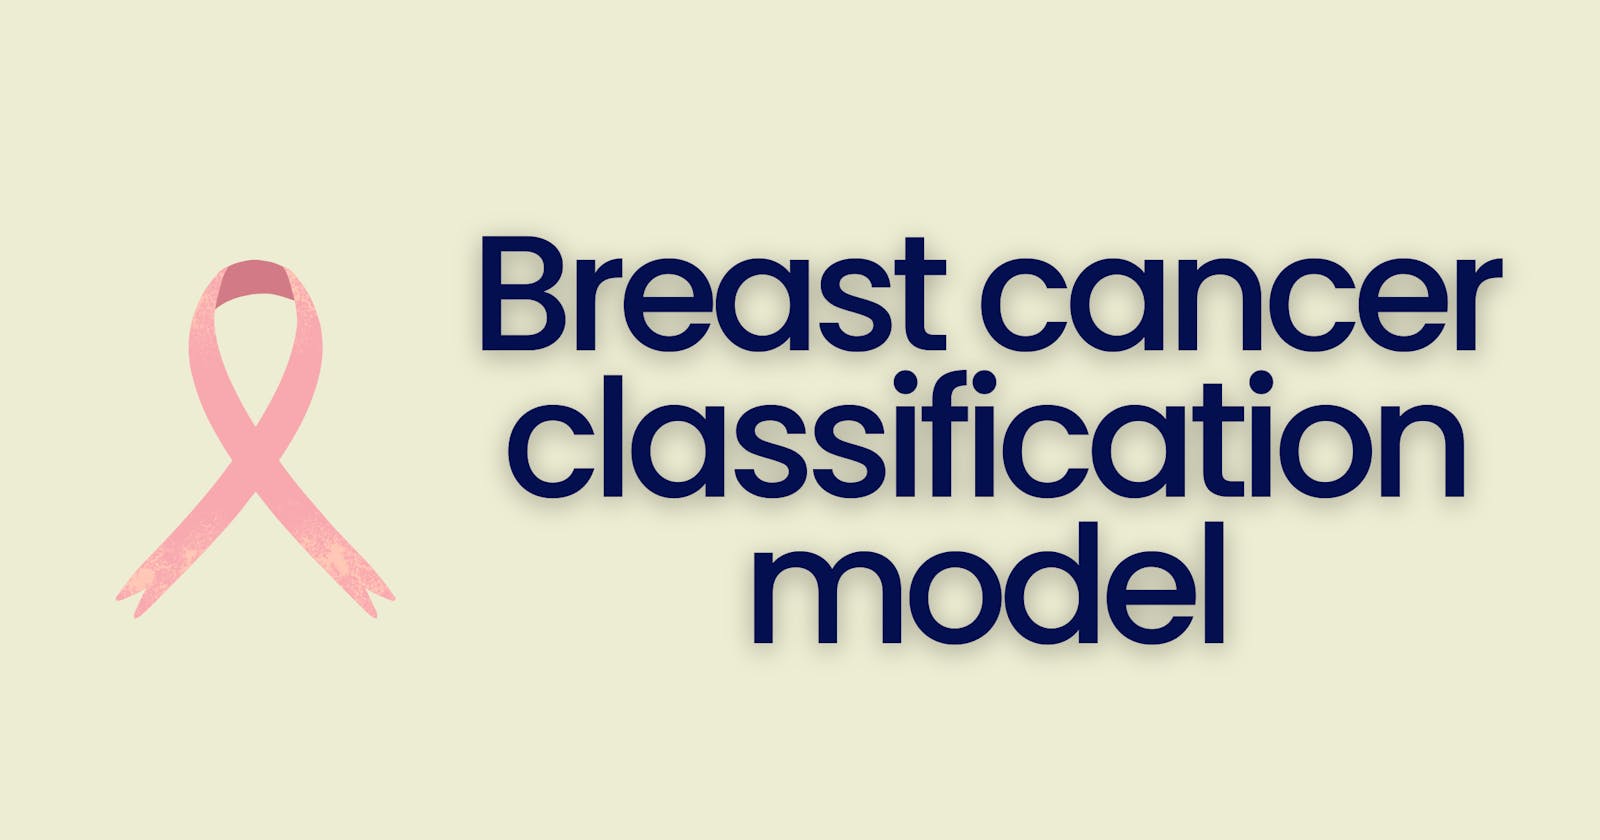 Breast cancer classification using Logistic Regression